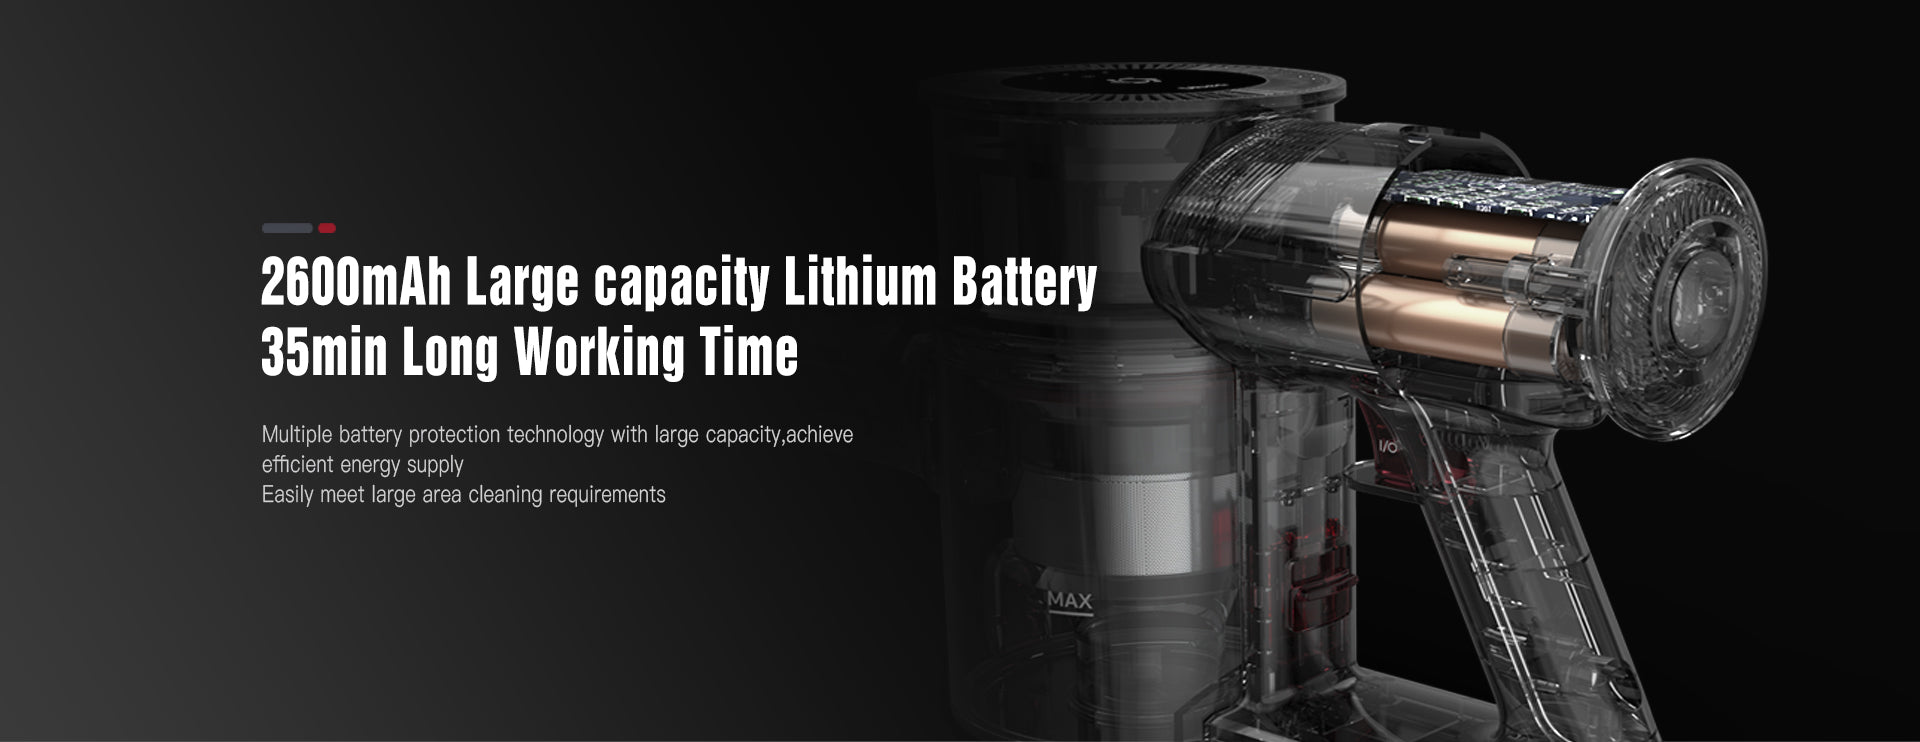 2600mAh_Large_capacity_Lithium_Battery35min_Long_Working_Time